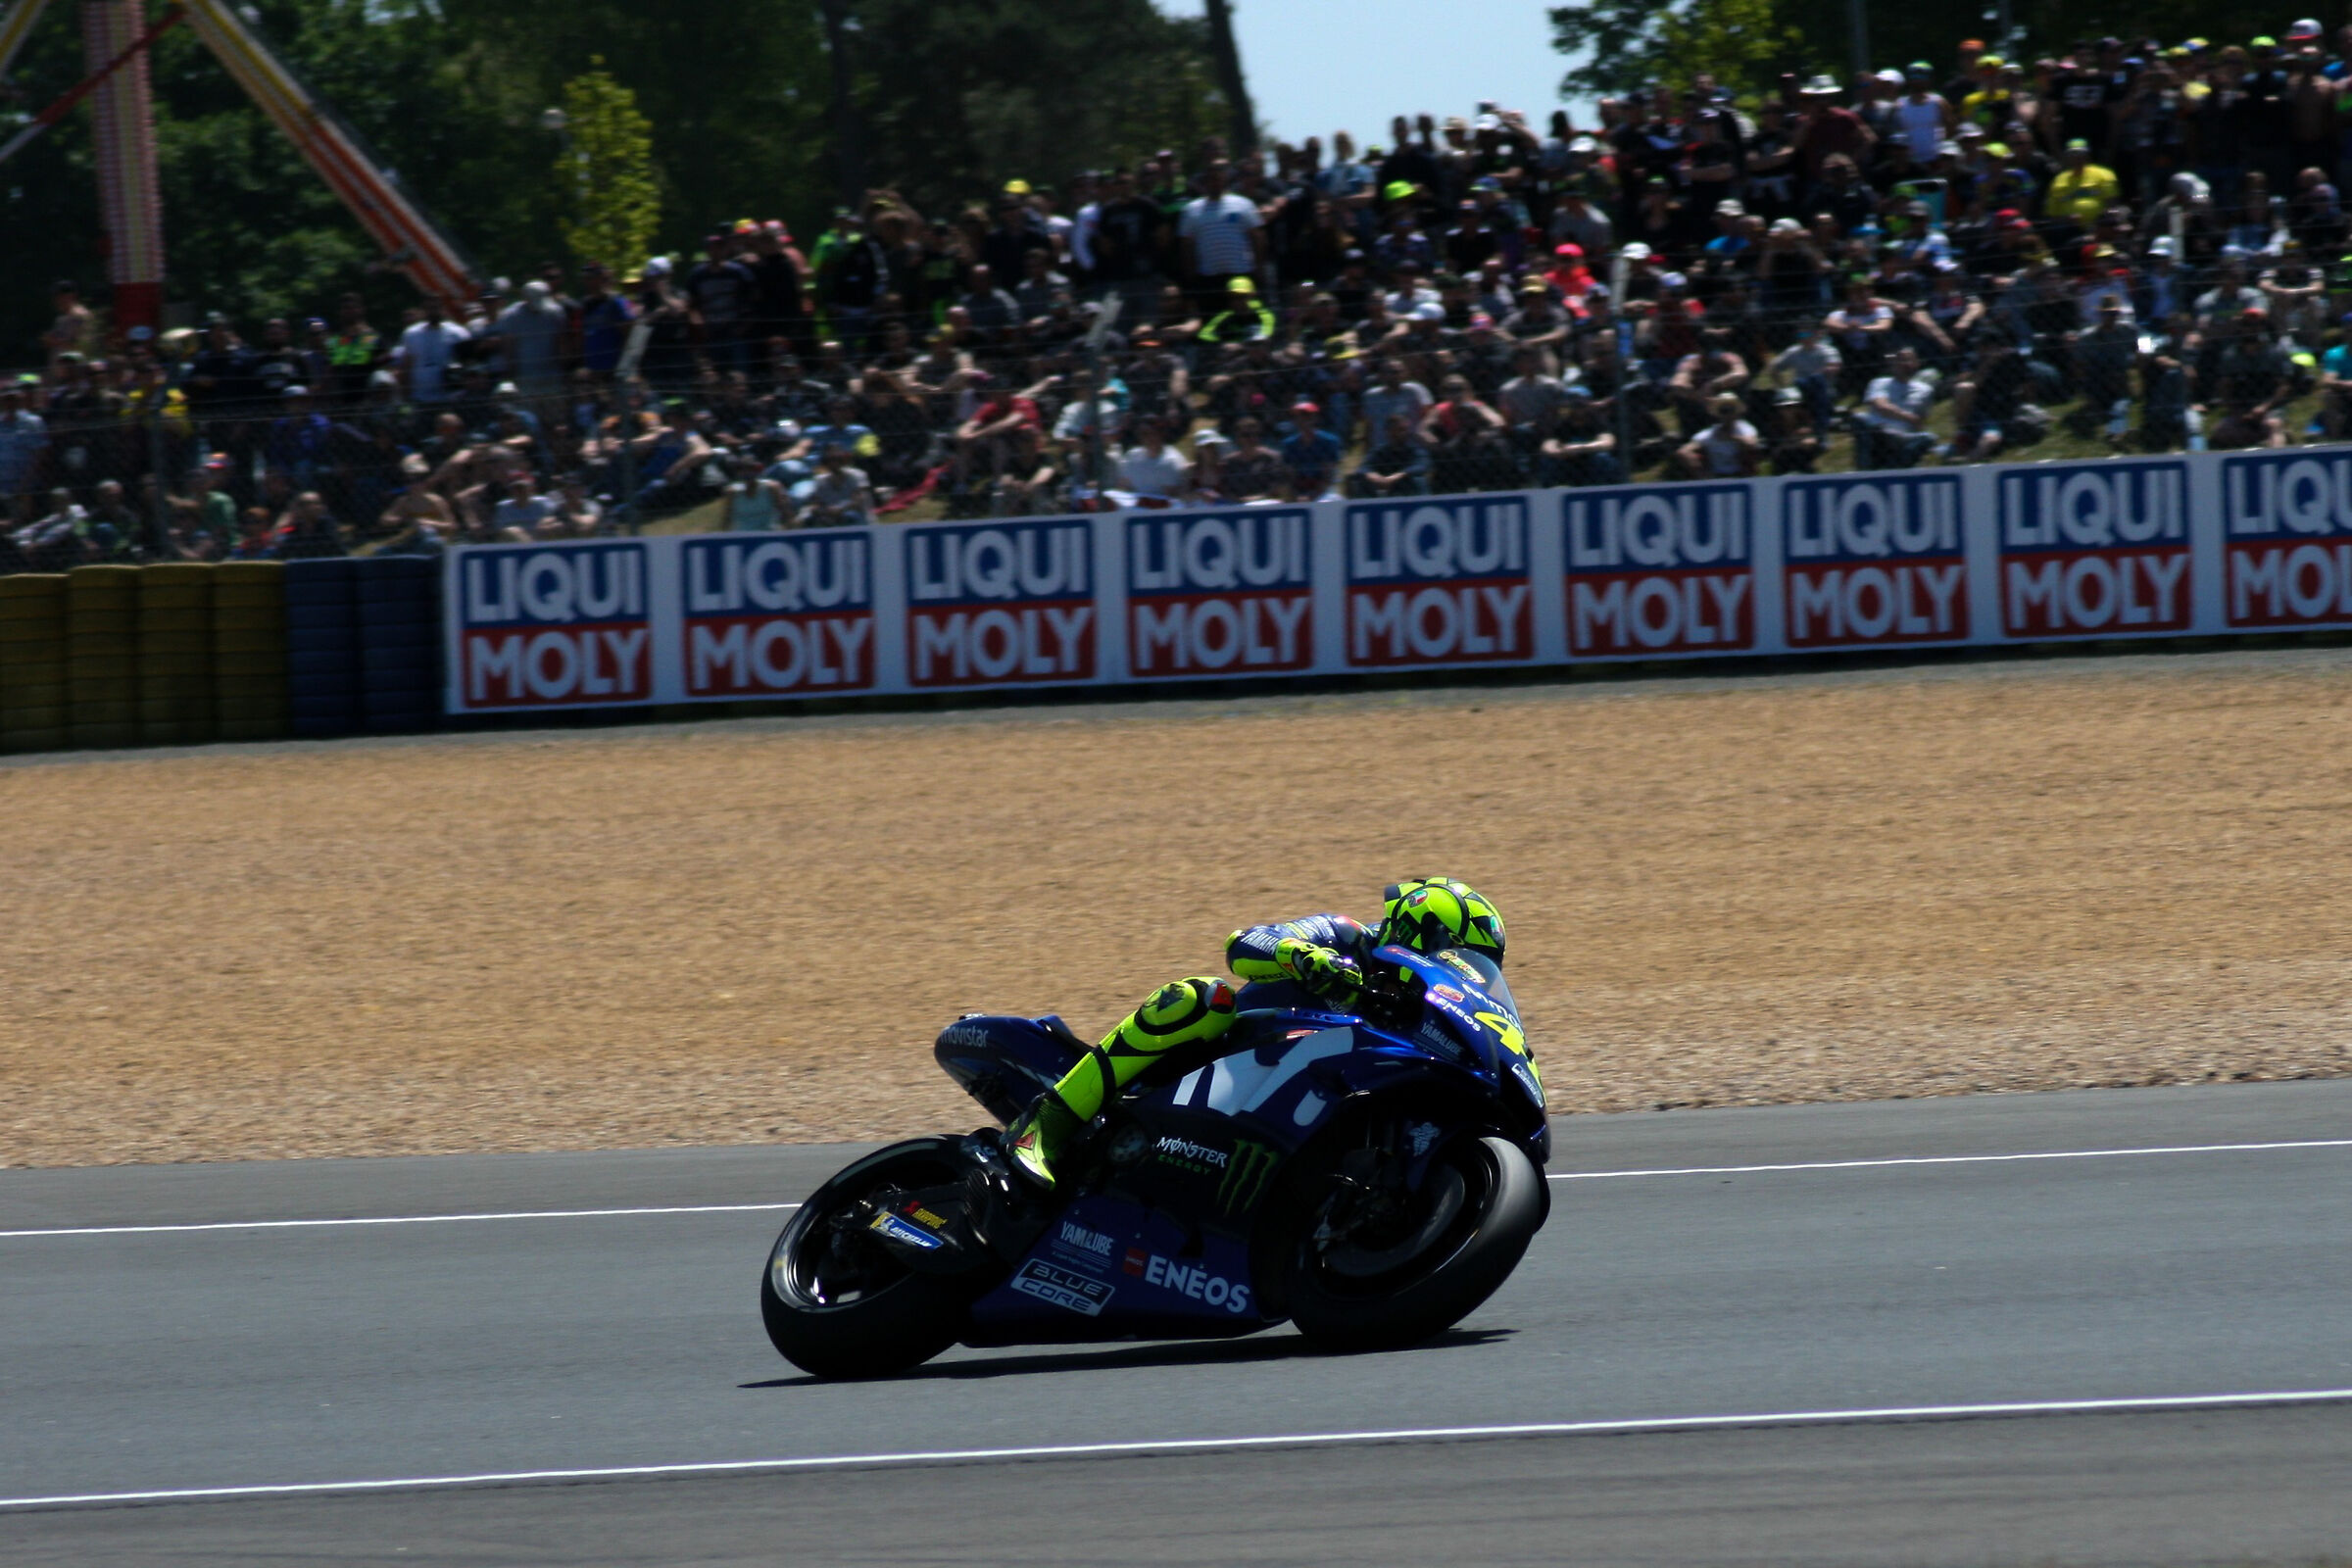 #46 THE DOCTOR ...